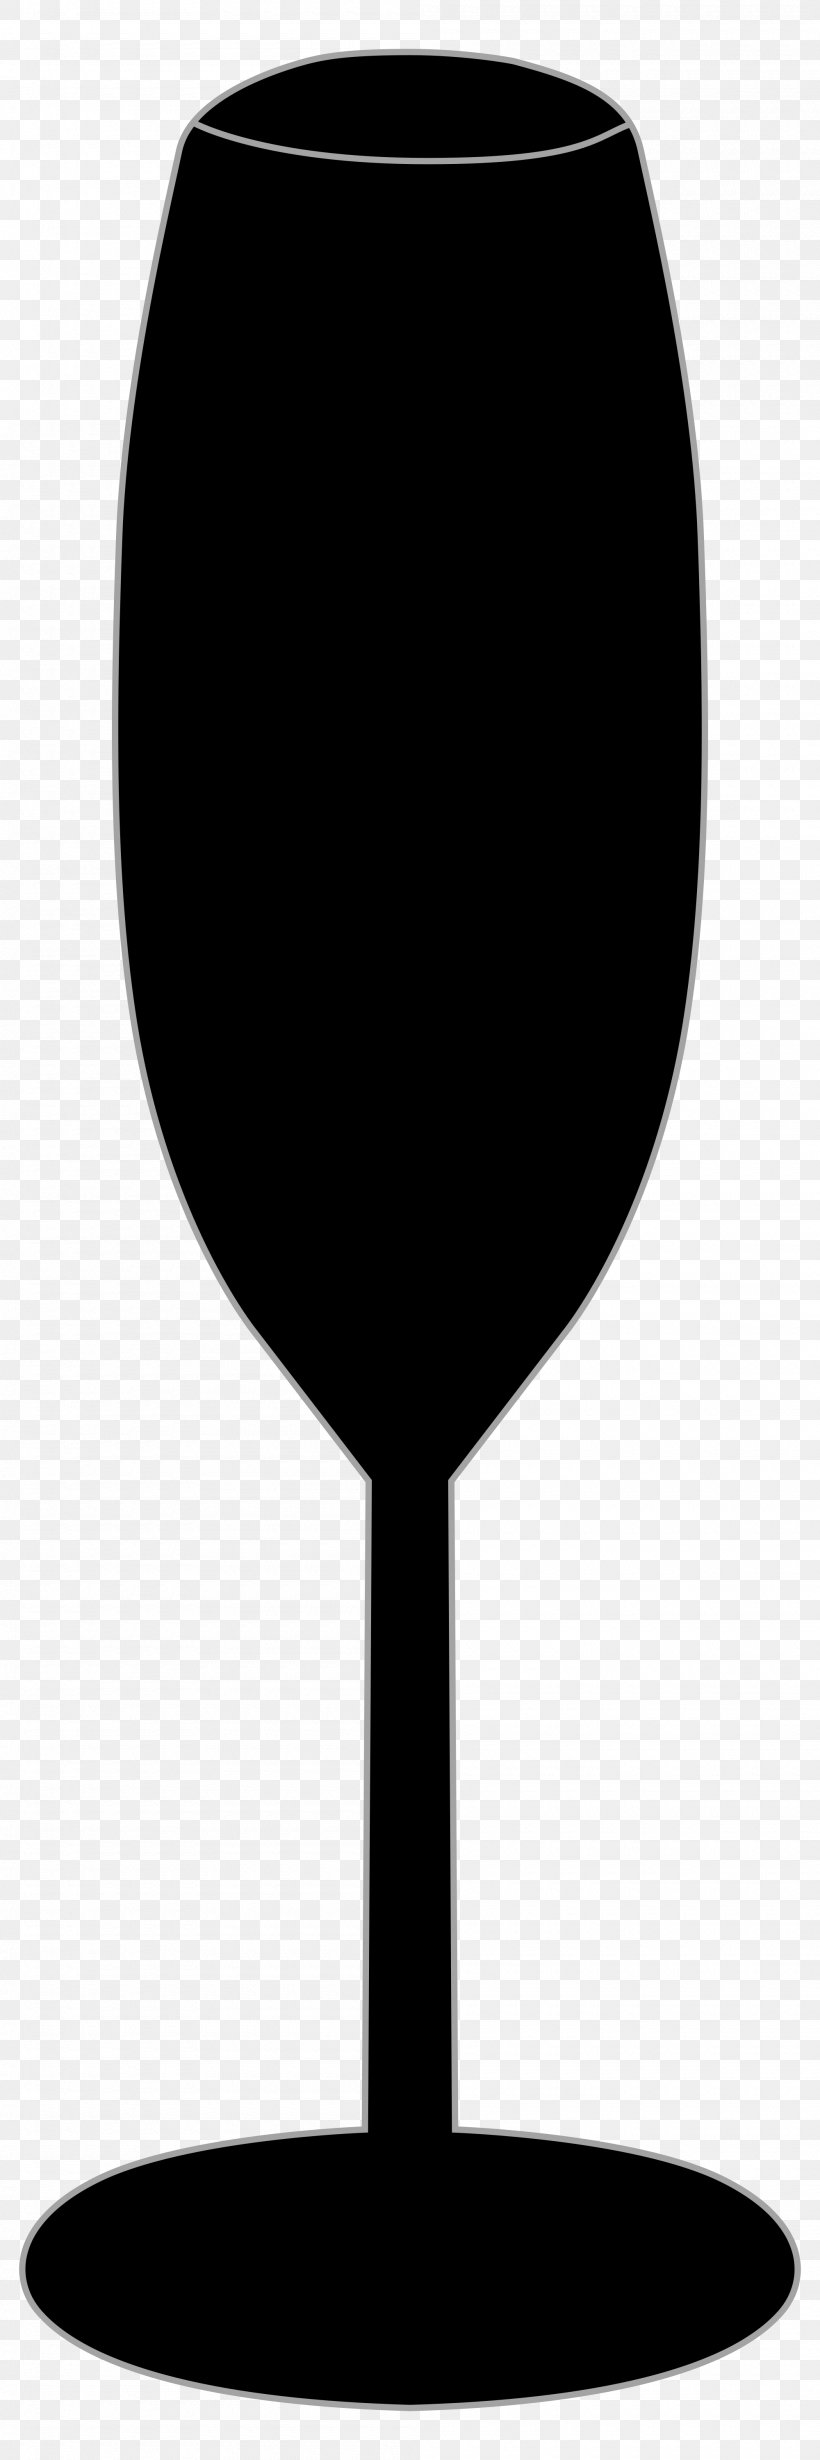 Wine Glass Stemware Champagne Glass Table-glass, PNG, 2000x6000px, Wine Glass, Beer Glasses, Black And White, Champagne Glass, Champagne Stemware Download Free